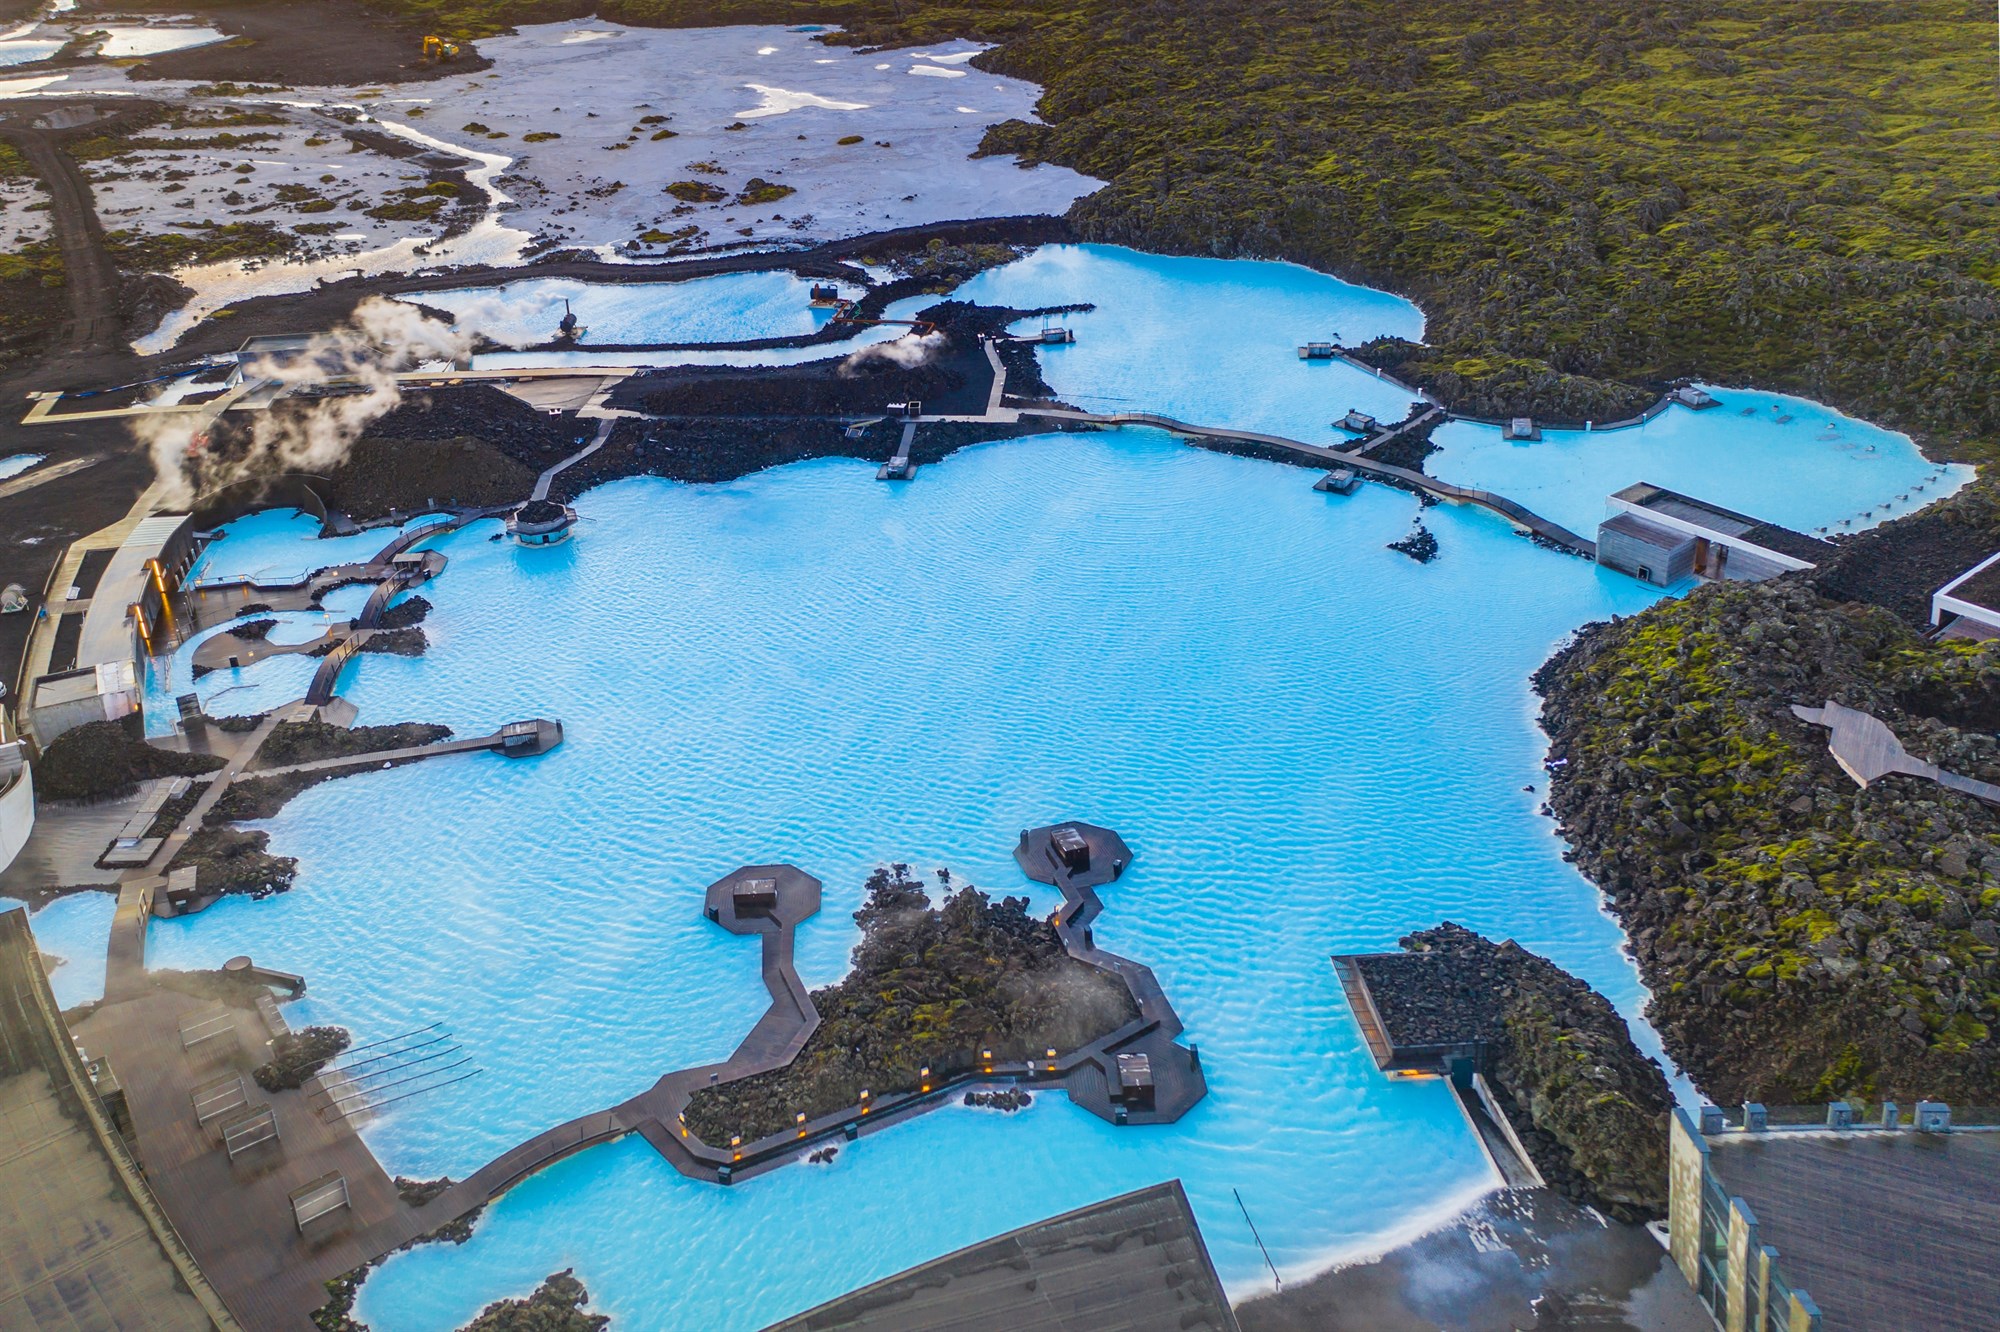 Blue Lagoon is located in the Reykjanes Peninsula Iceland